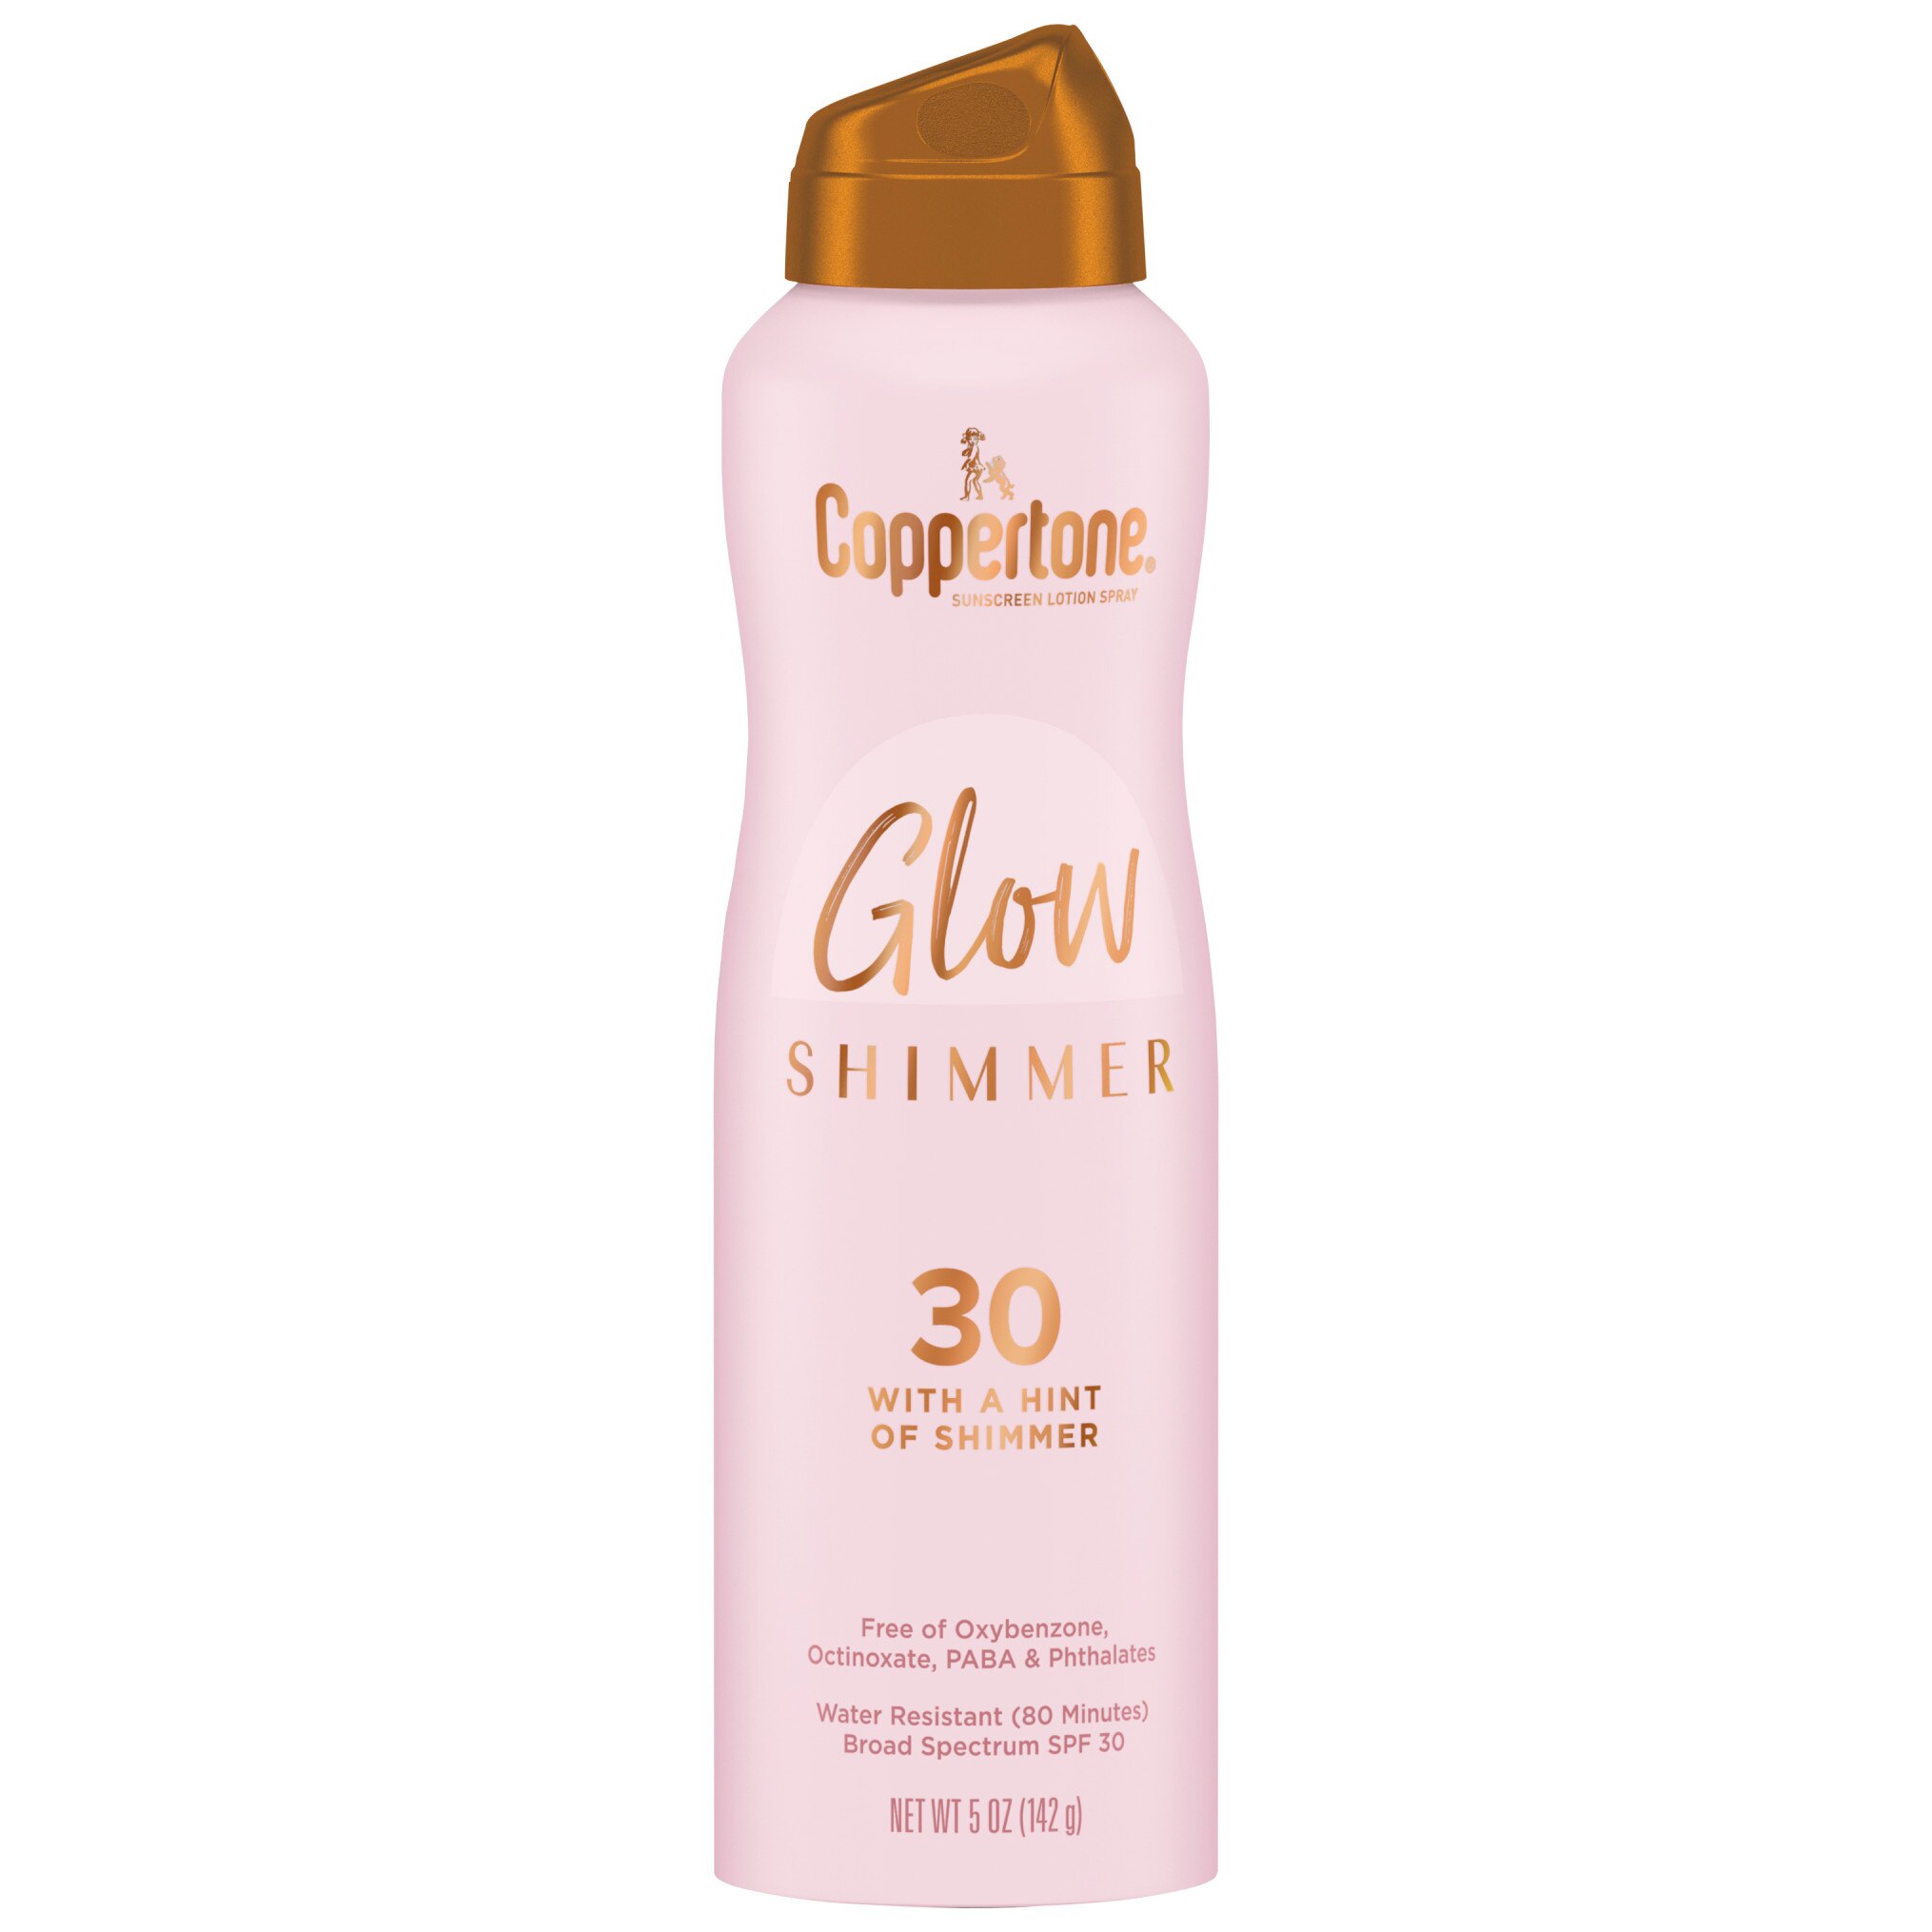 Coppertone Glow with Shimmer Broad Spectrum SPF 30 Spray Sunscreen, 5 OZ